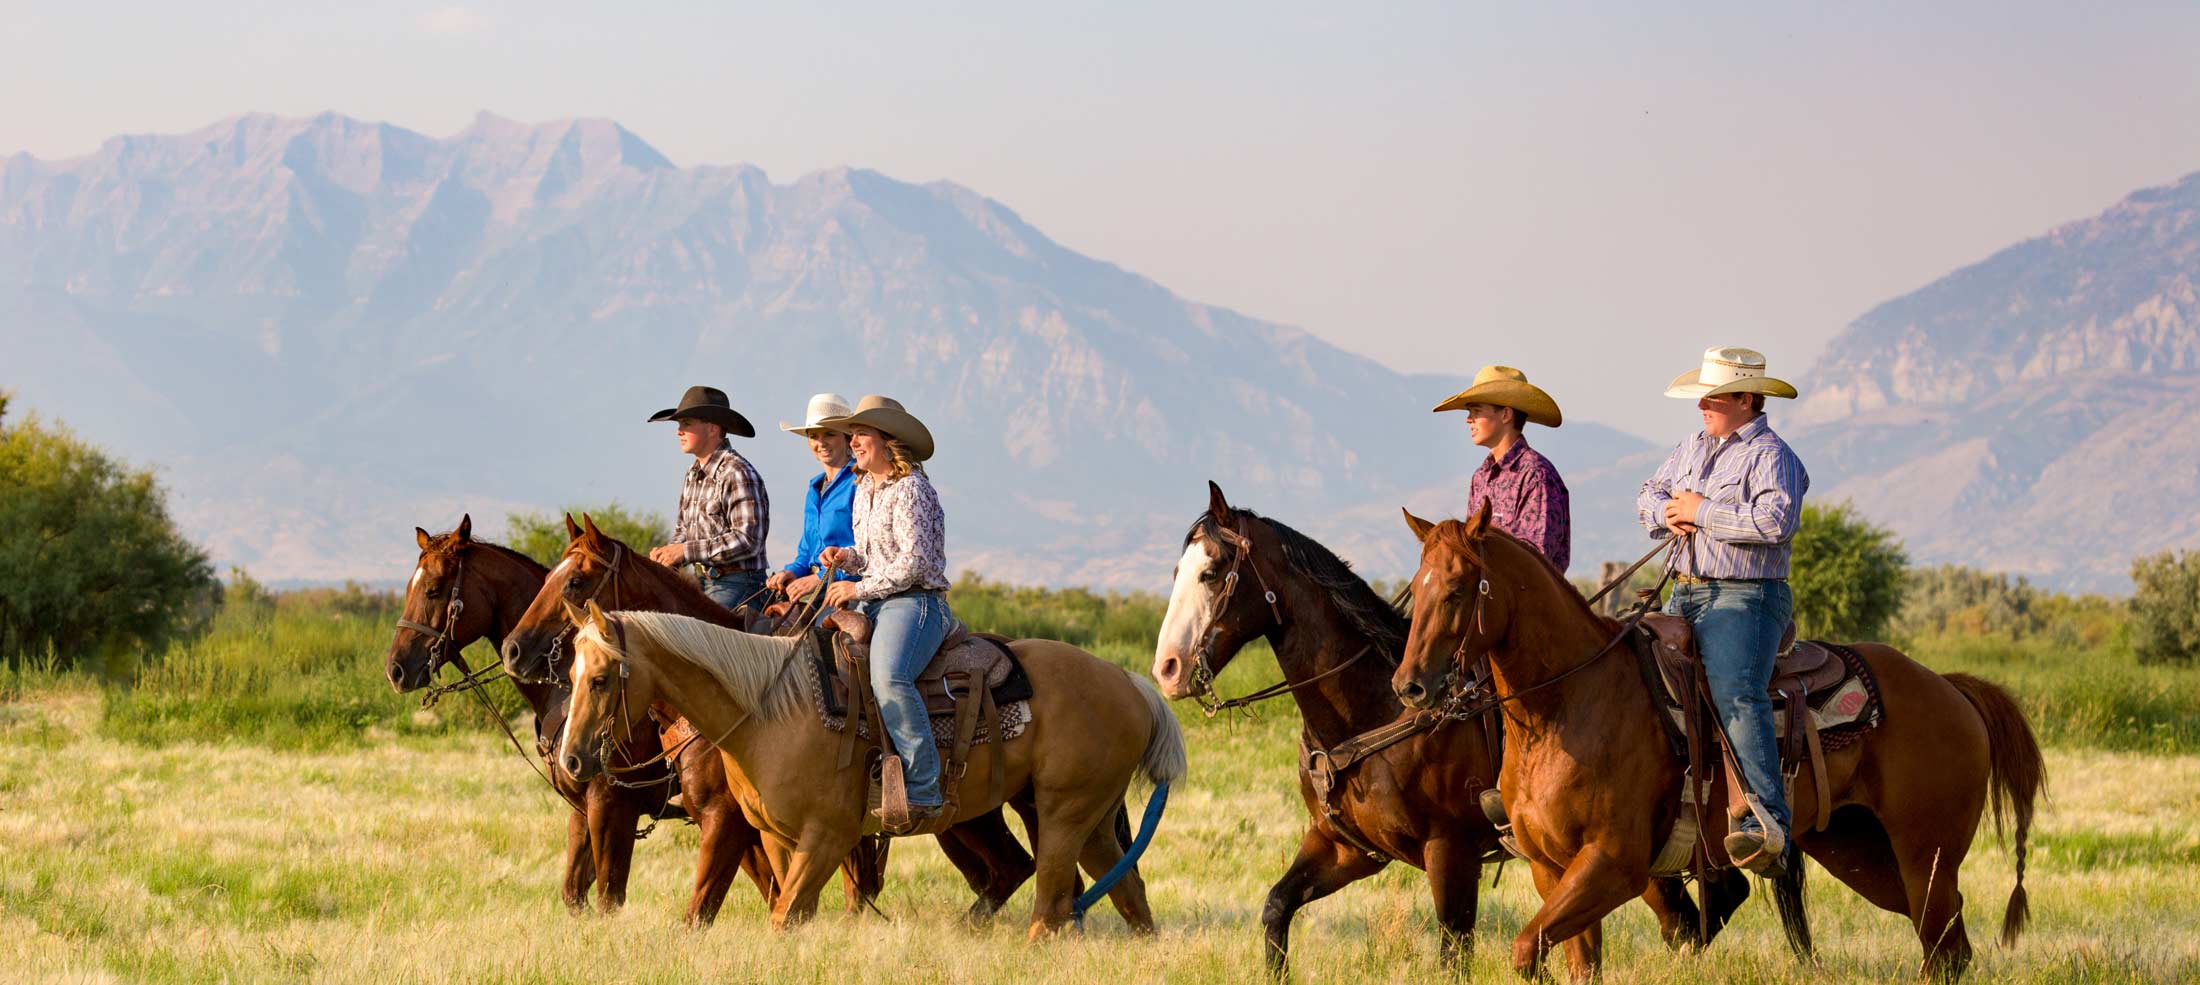 Ranch Vacations | Montana’s Missouri River Country